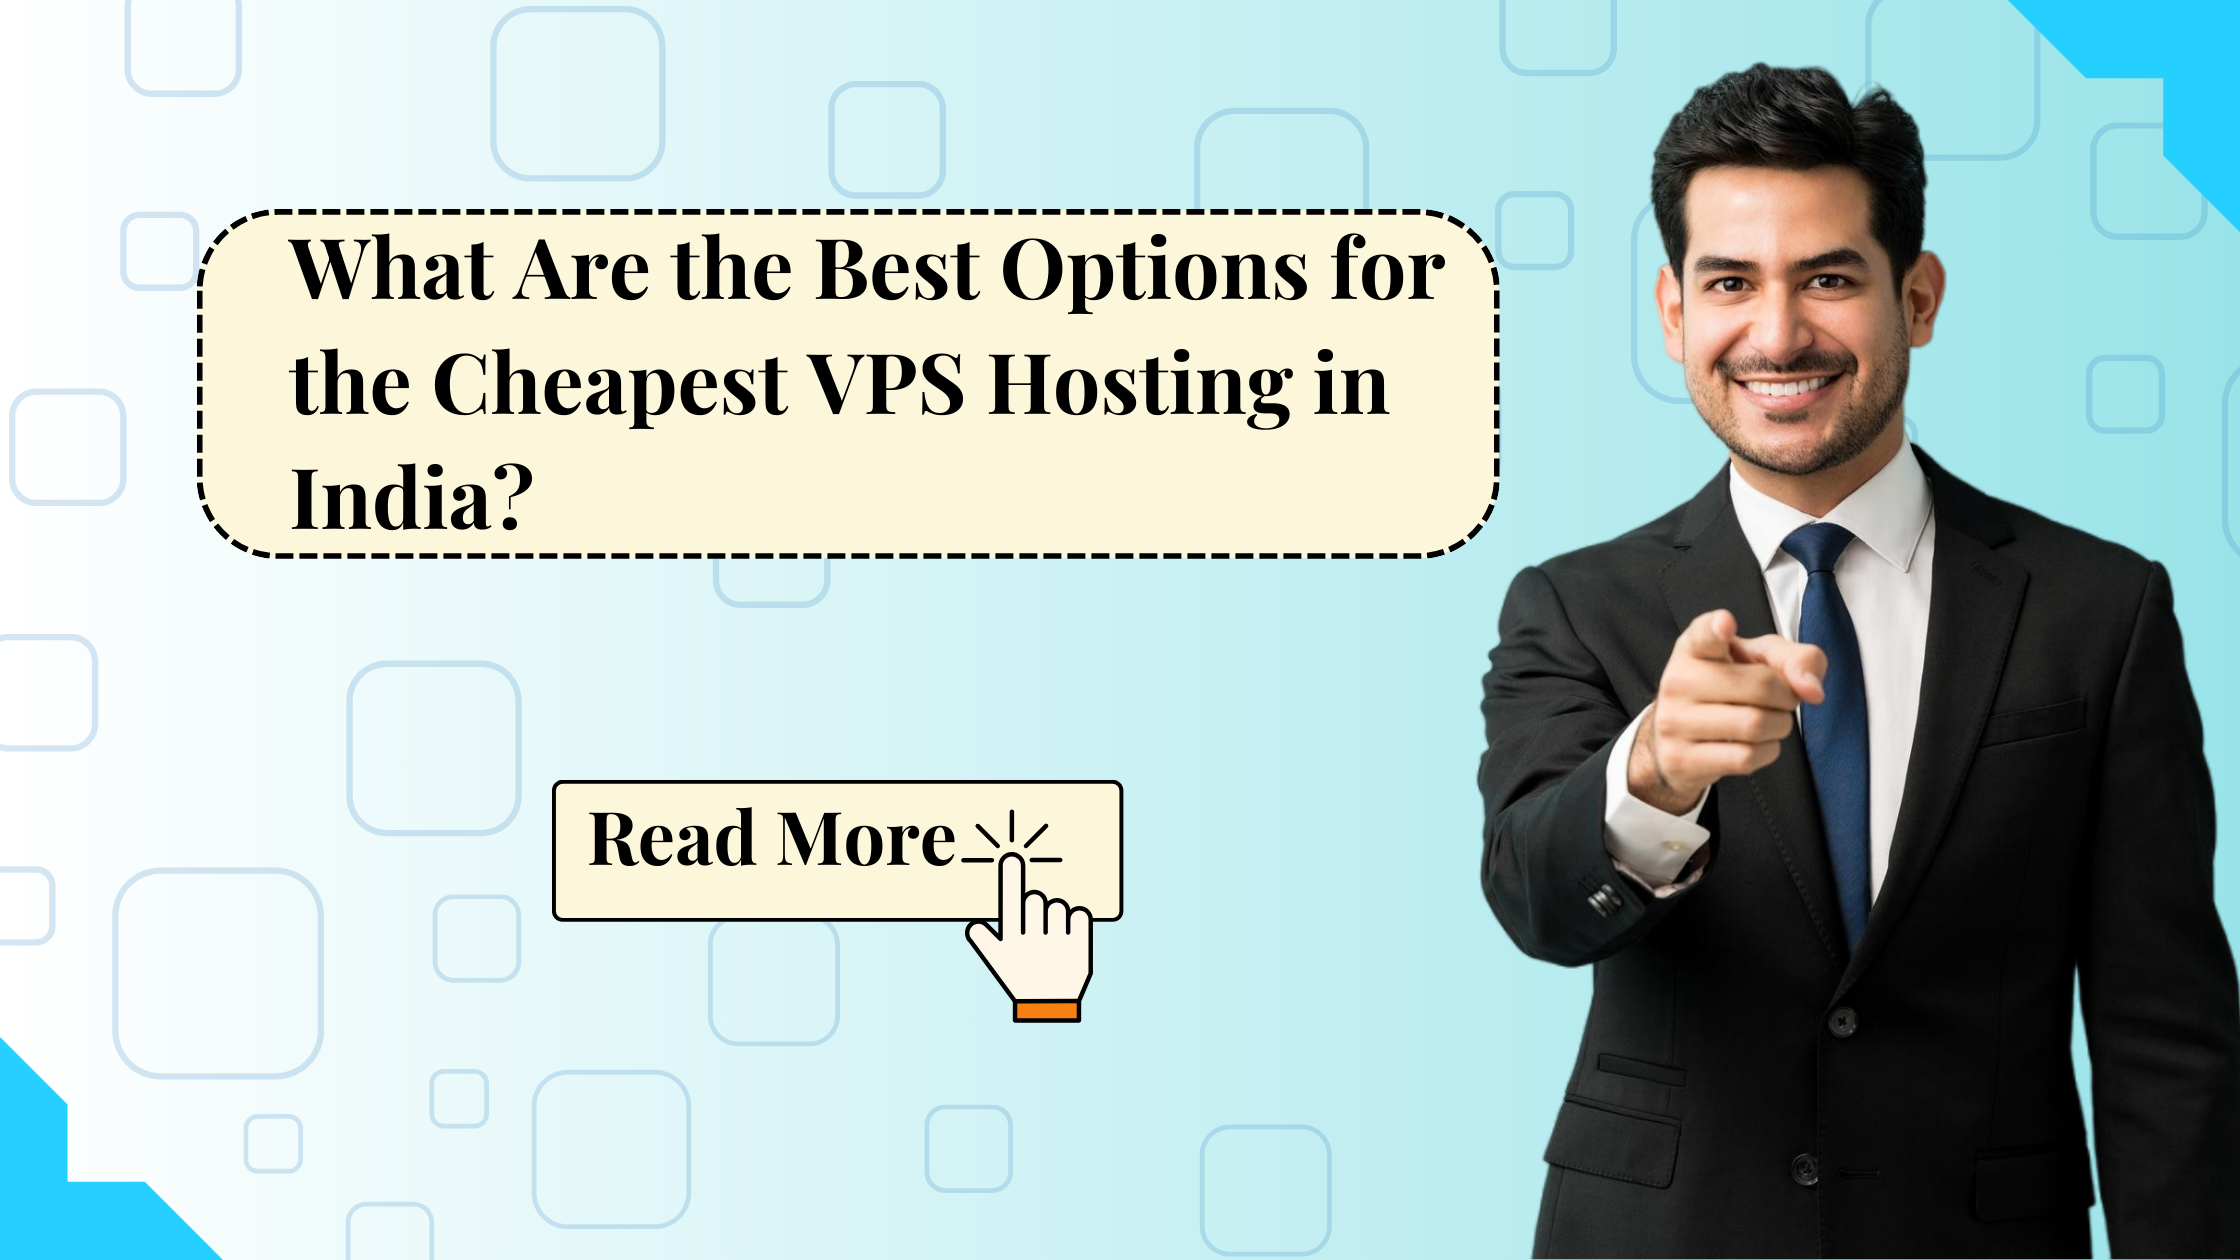 Discover the best options for the cheapest VPS hosting in India. Compare providers like Hostinger, Ideastack, Hostingbuzz, DigitalOcean, and Vultr for optimal performance.